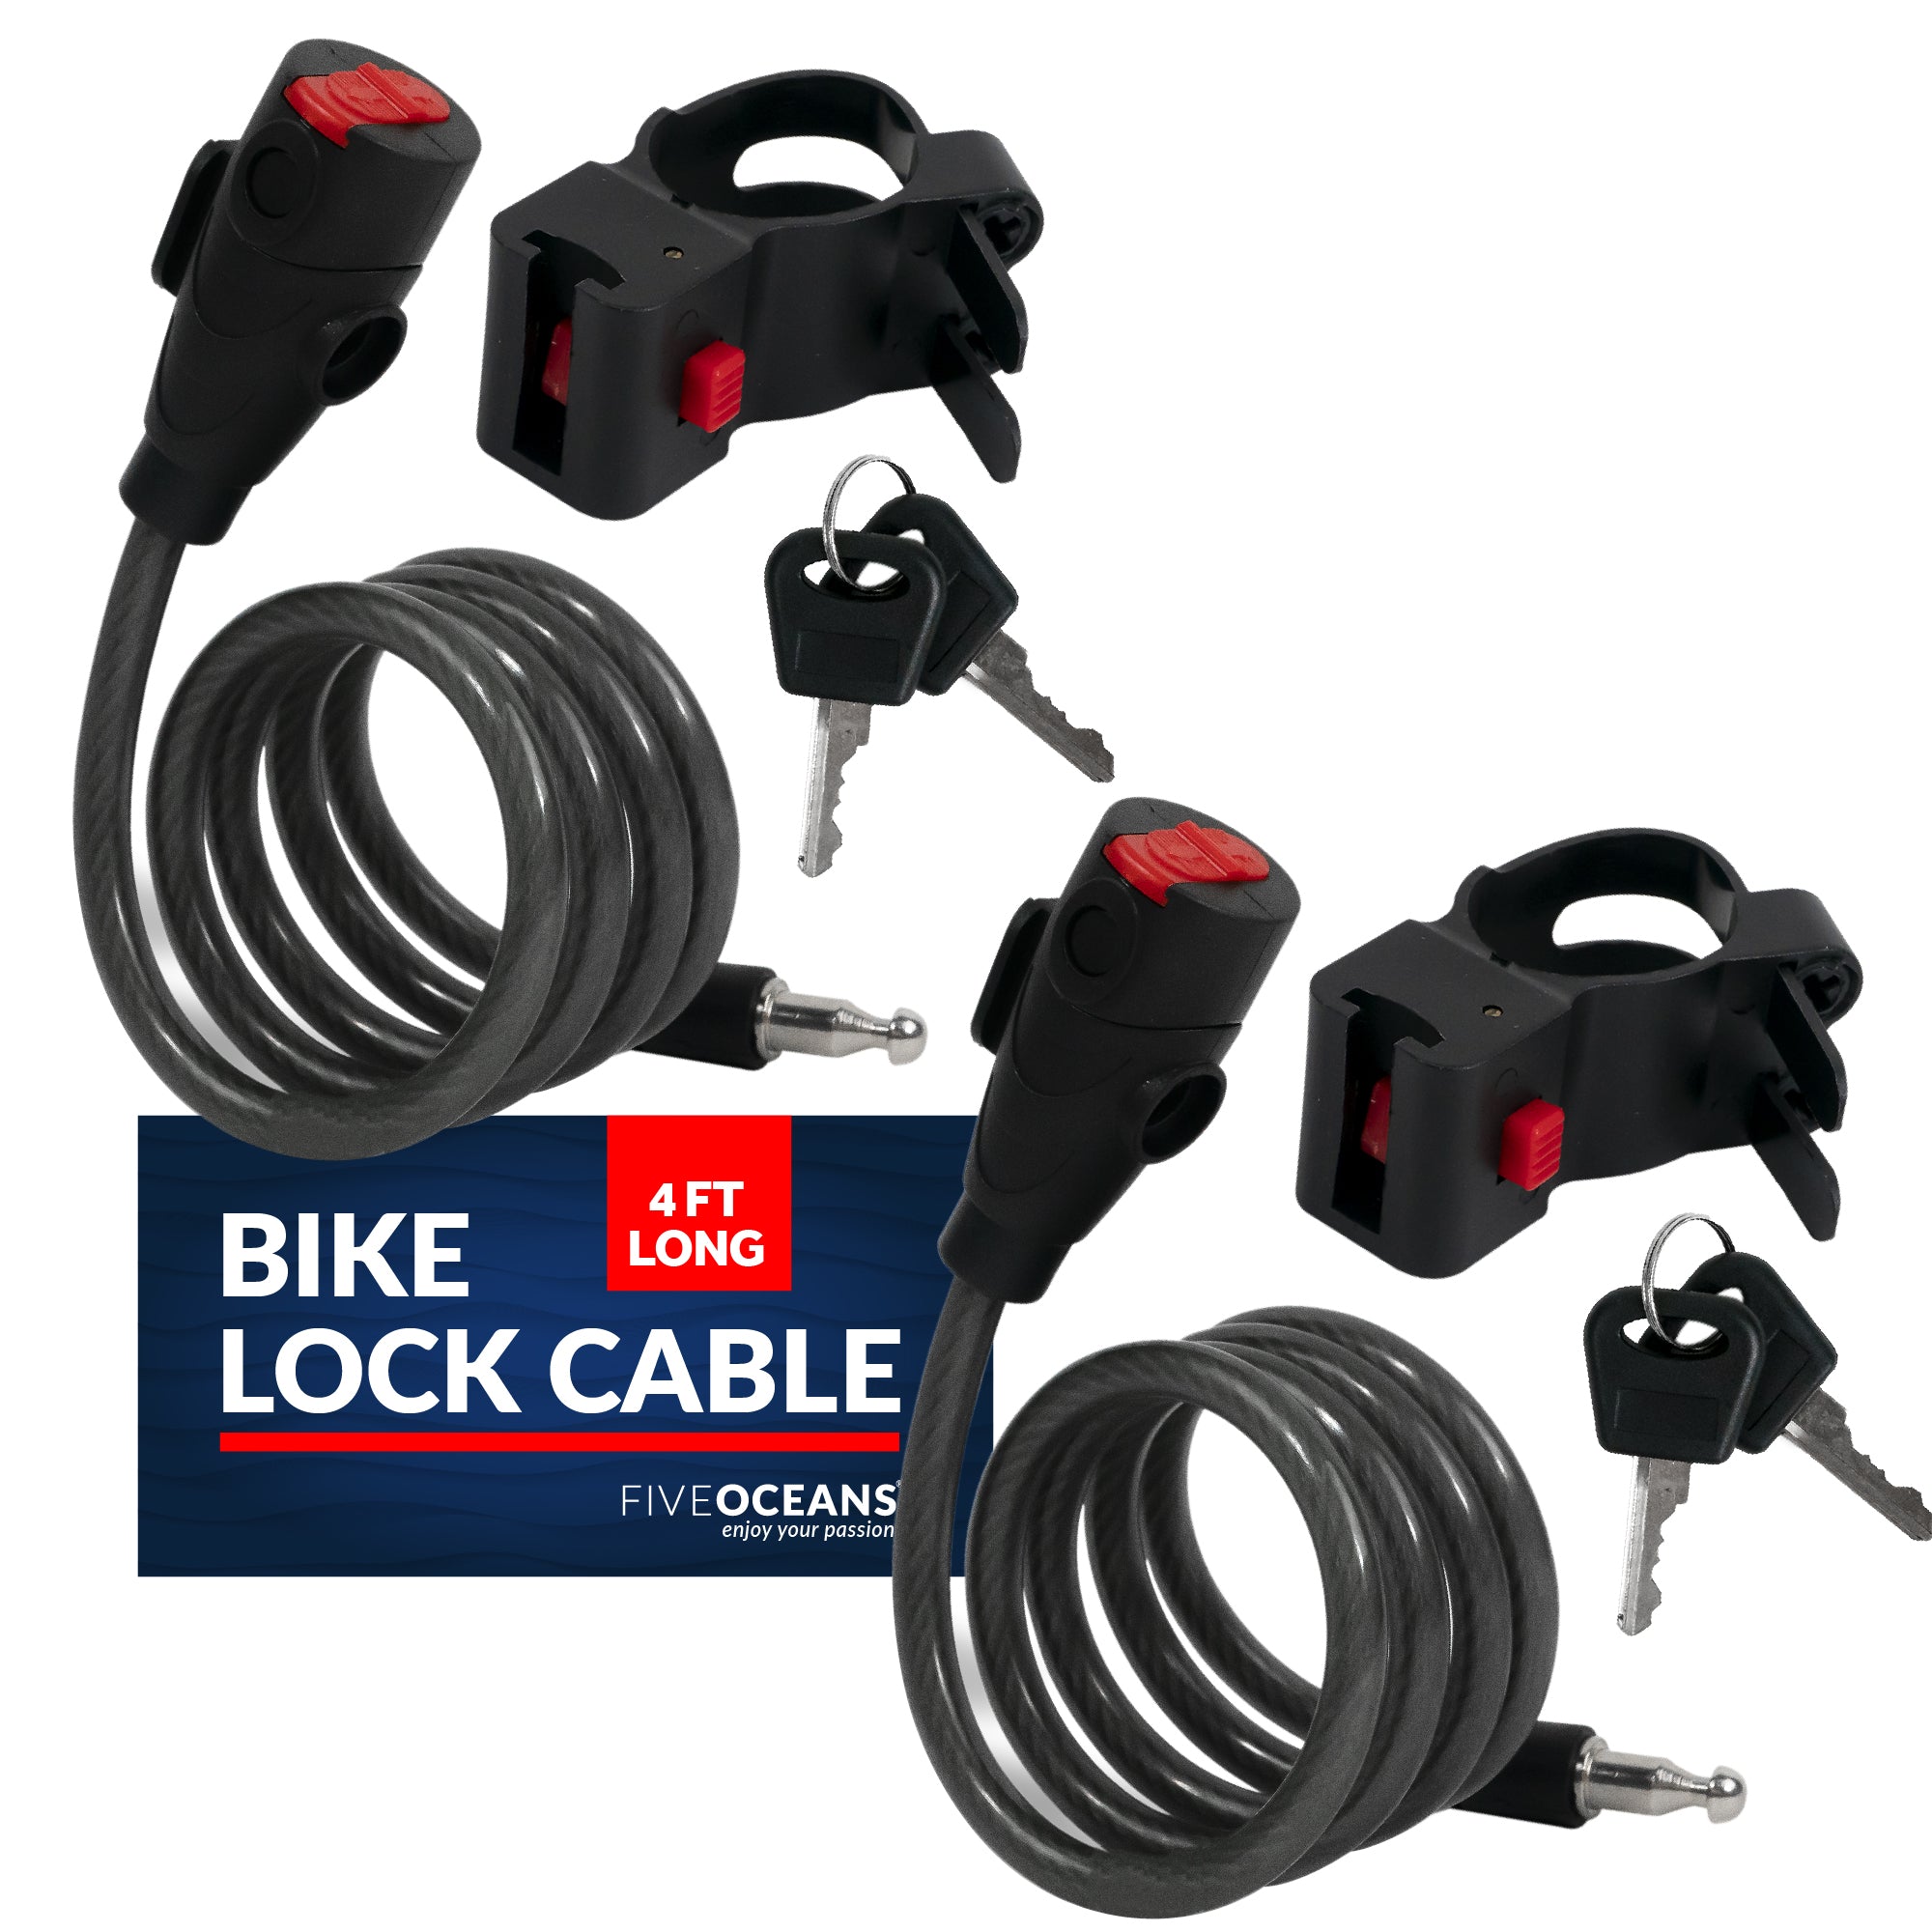 Bike Lock Cable, Keyed, with Mounting Bracket, 4', 2-pack - FO3956-M2